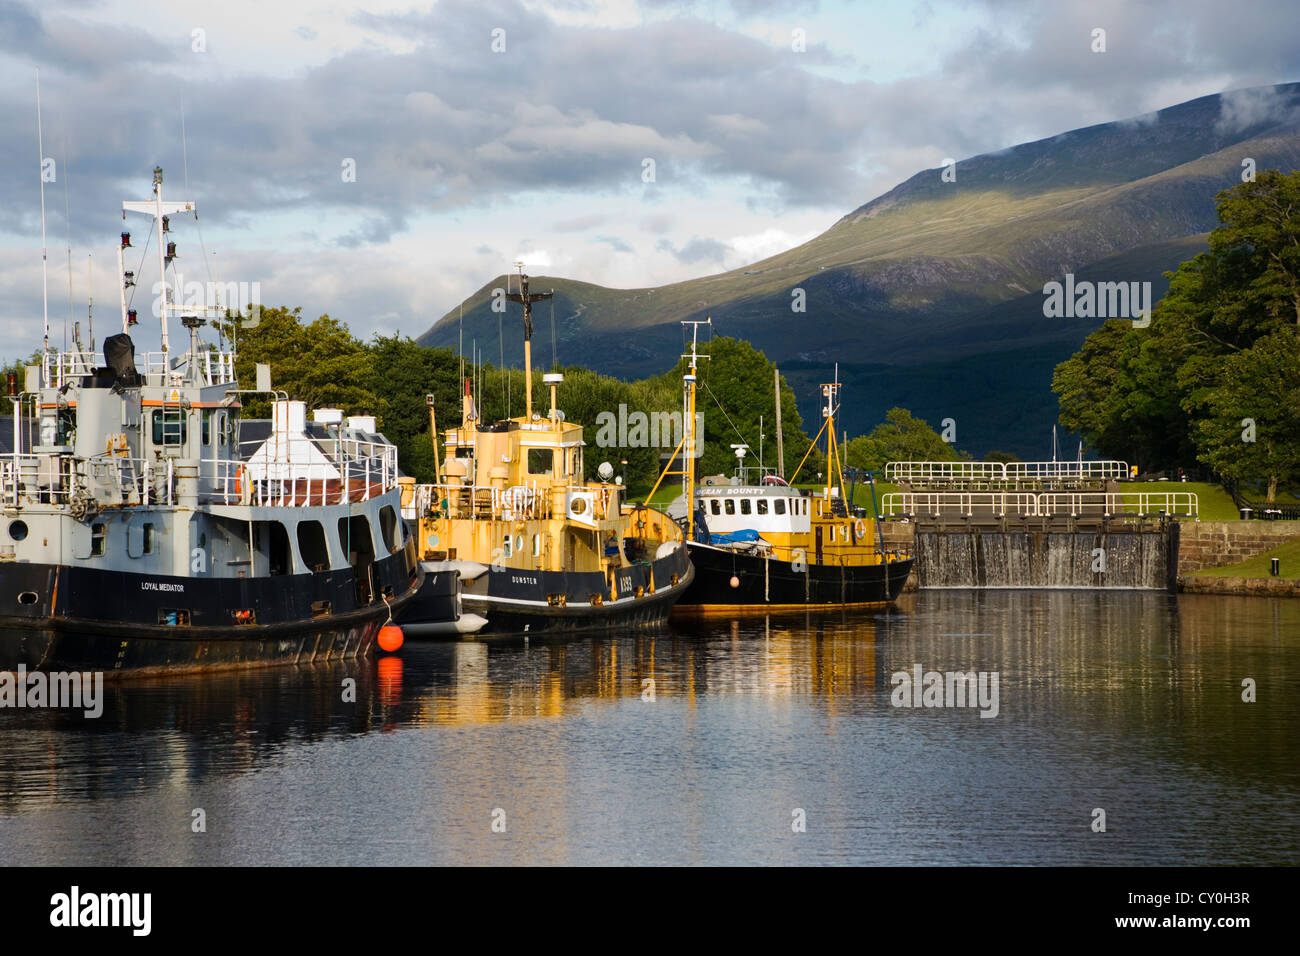 Boats moored on the Caledonian Canal at Corpach near Fort William in Inverness-shire;Scotland Stock Photo